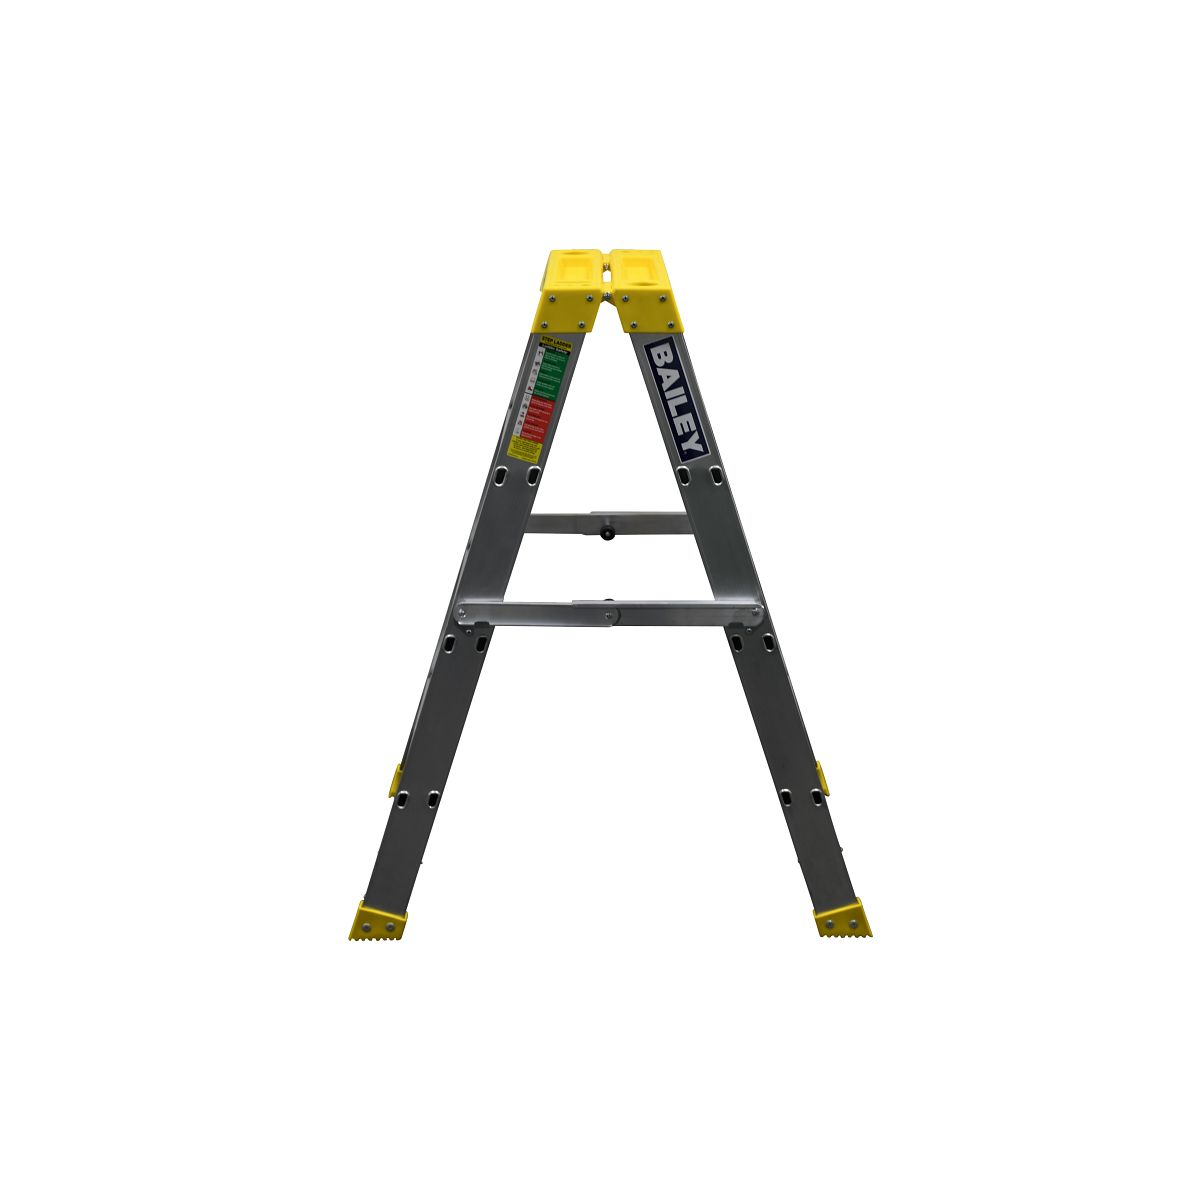 Pro Aluminium Double Sided Big Top Ladder 4 FS13967 by Bailey